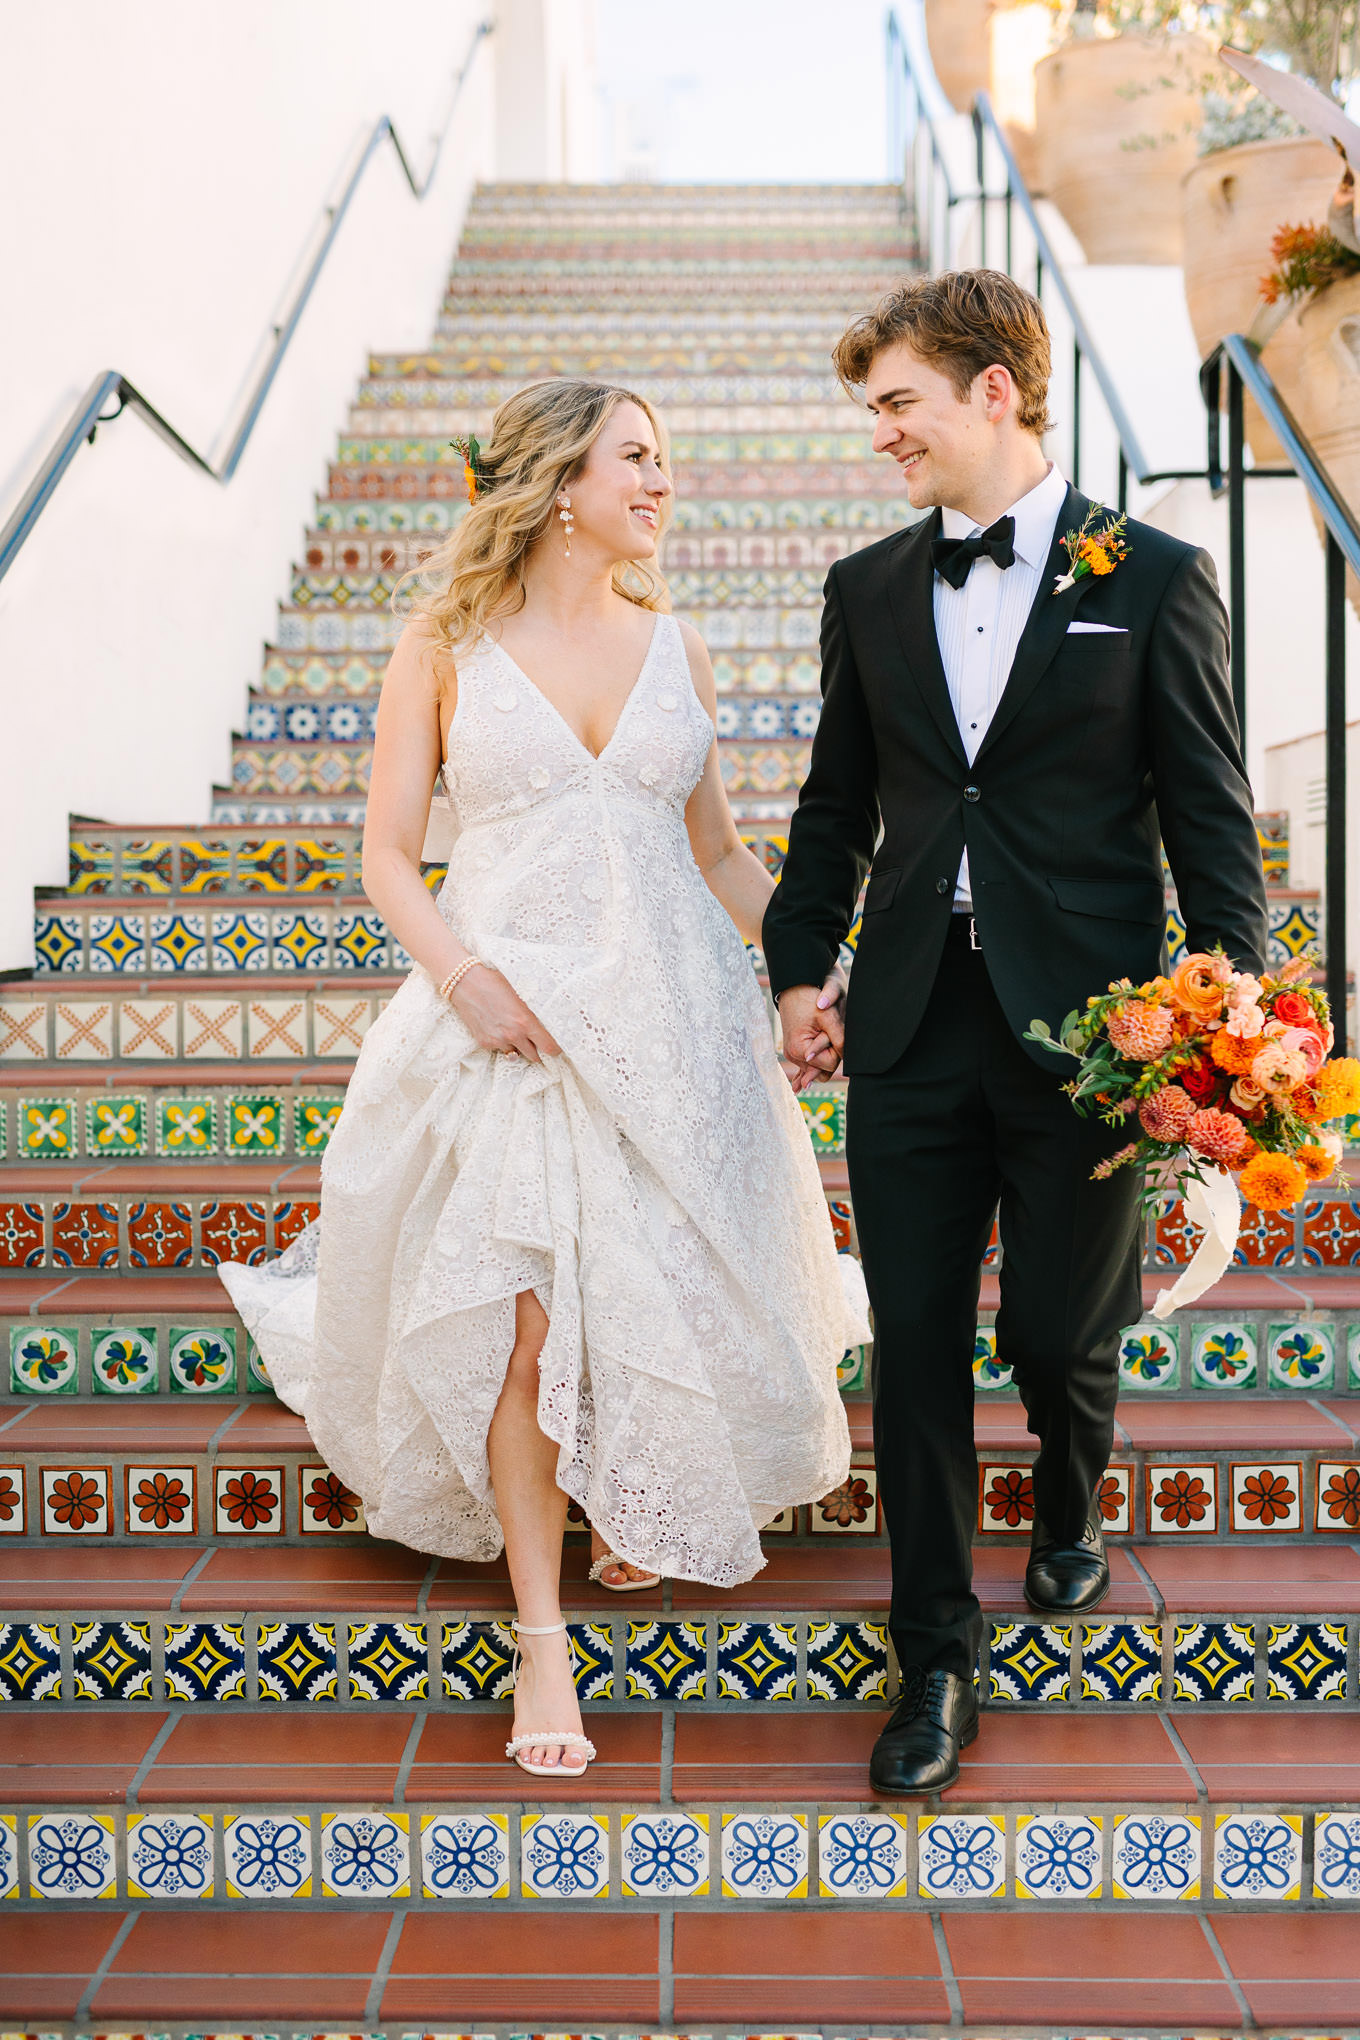 Santa Barbara Elopement | Wedding and elopement photography roundup | Los Angeles and Palm Springs  photographer | #losangeleswedding #palmspringswedding #elopementphotographer

Source: Mary Costa Photography | Los Angeles